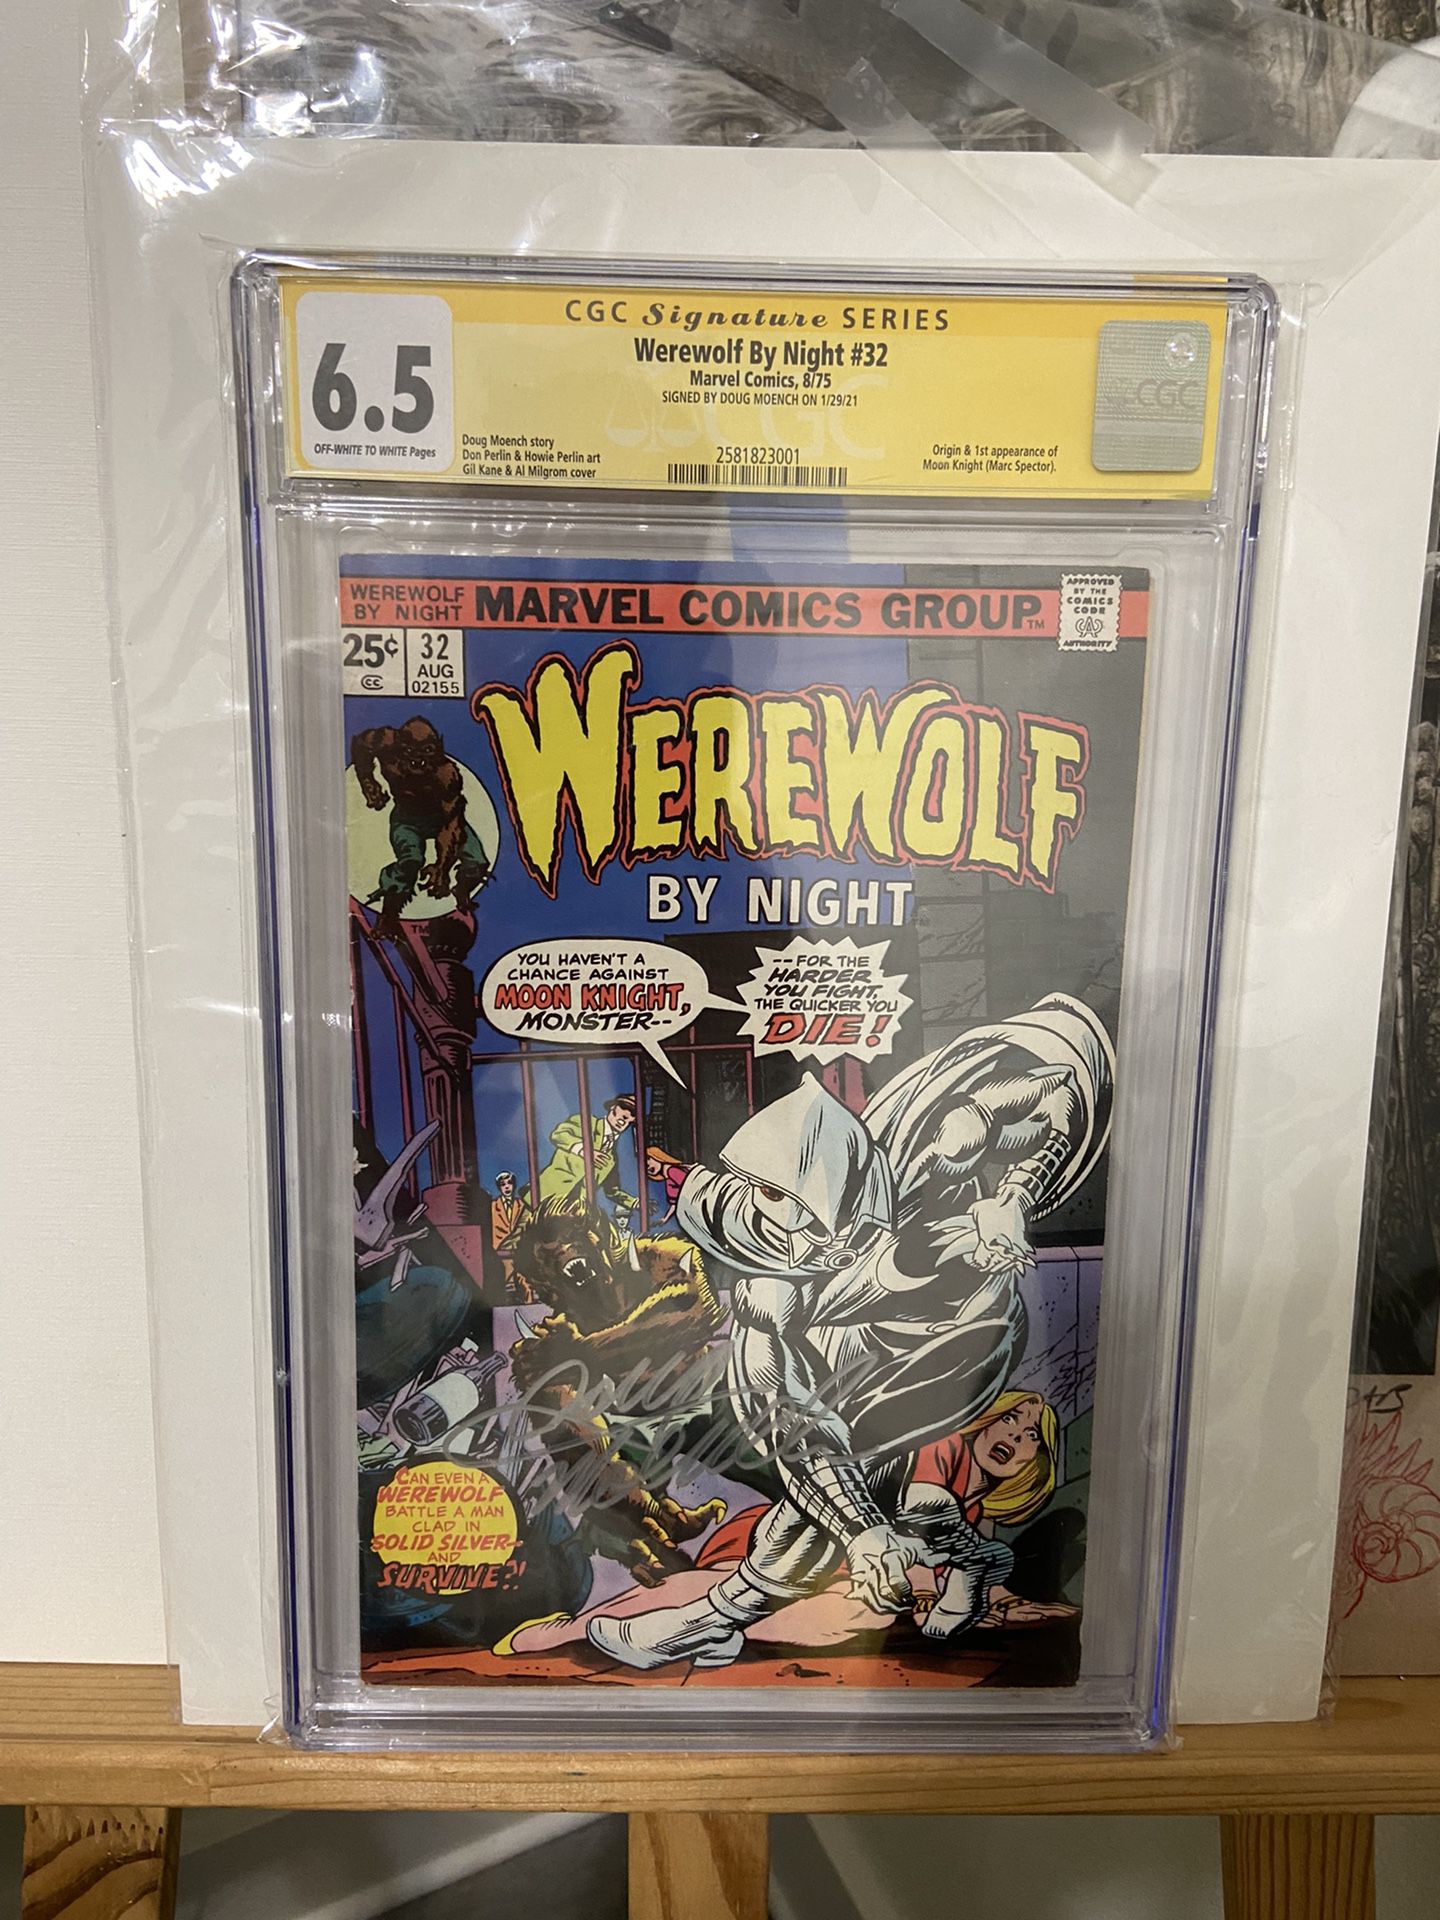 1975 Werewolf By Night 32 CGC 6.5 1st Moon Knight Signed By Creator!